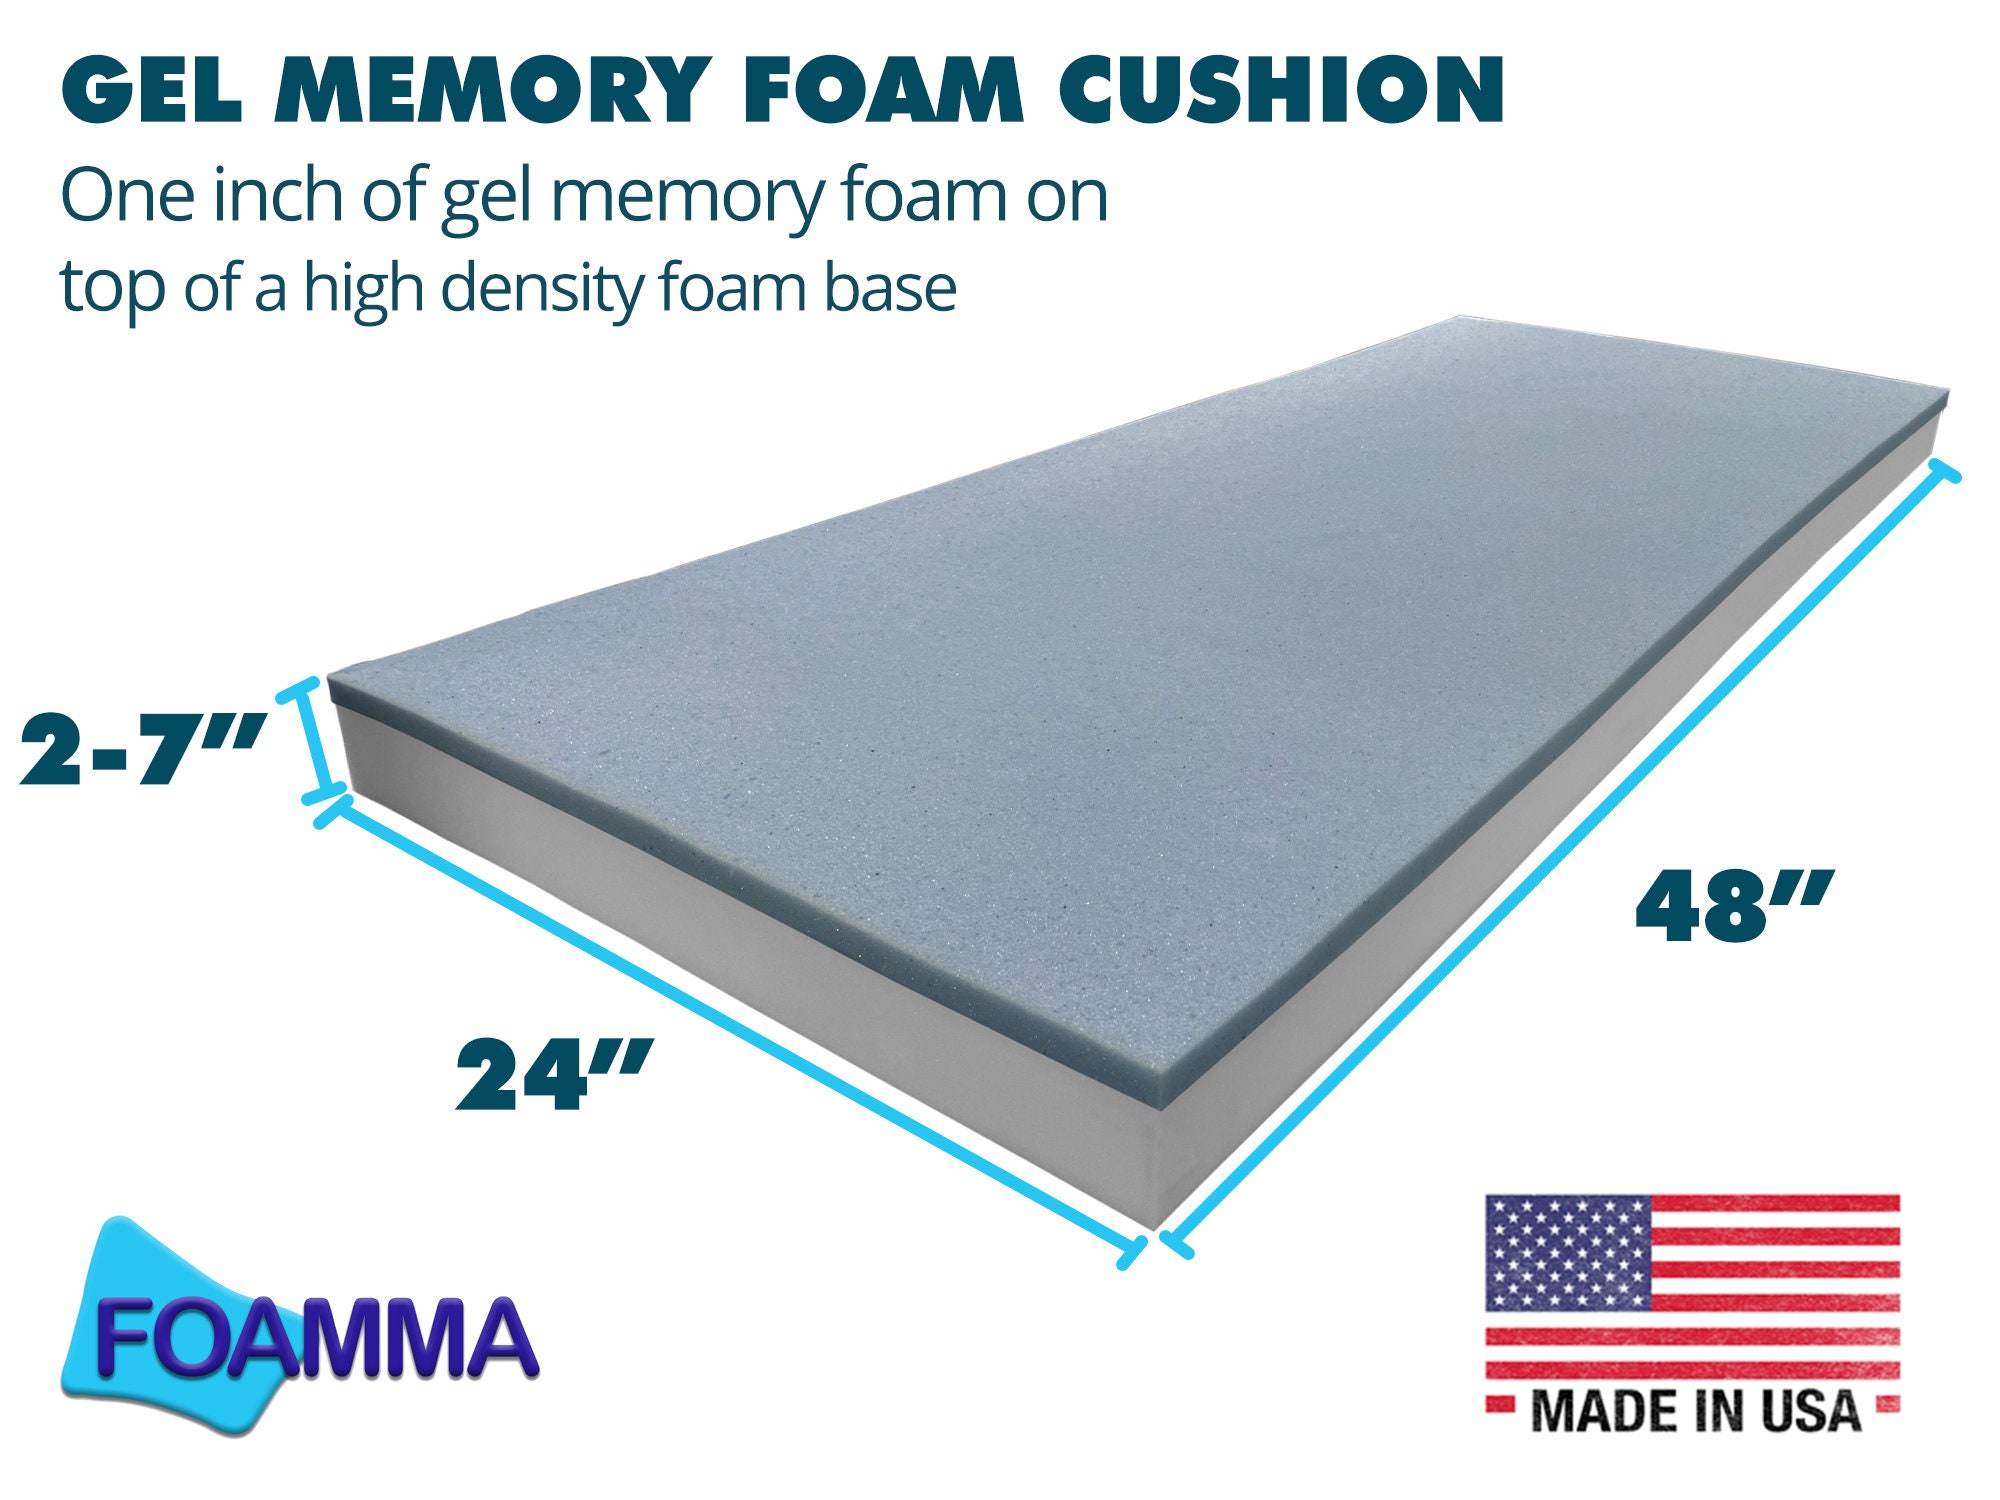 Foamma 4 x 24 x 96 Upholstery Foam High Density Foam (Chair Cushion  Square Foam for Dining Chairs, Bench Seat Cushion Replacement)